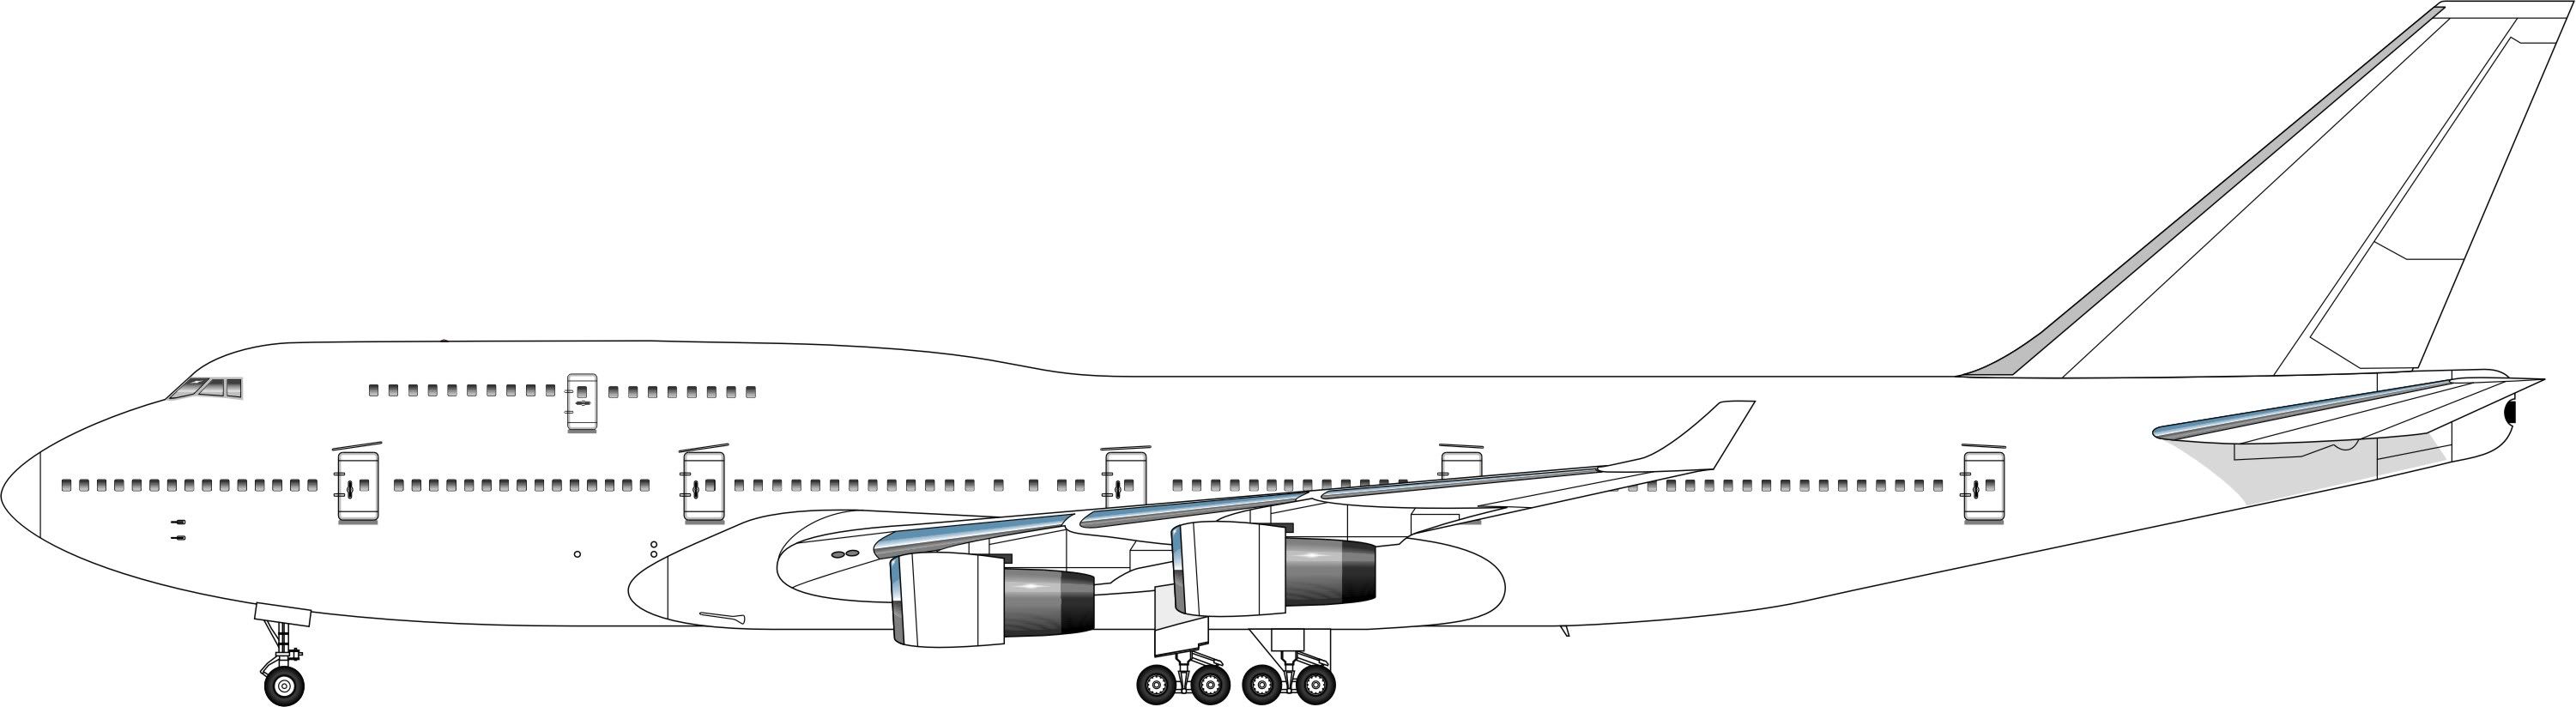 collection-of-boeing-clipart-free-download-best-boeing-clipart-on